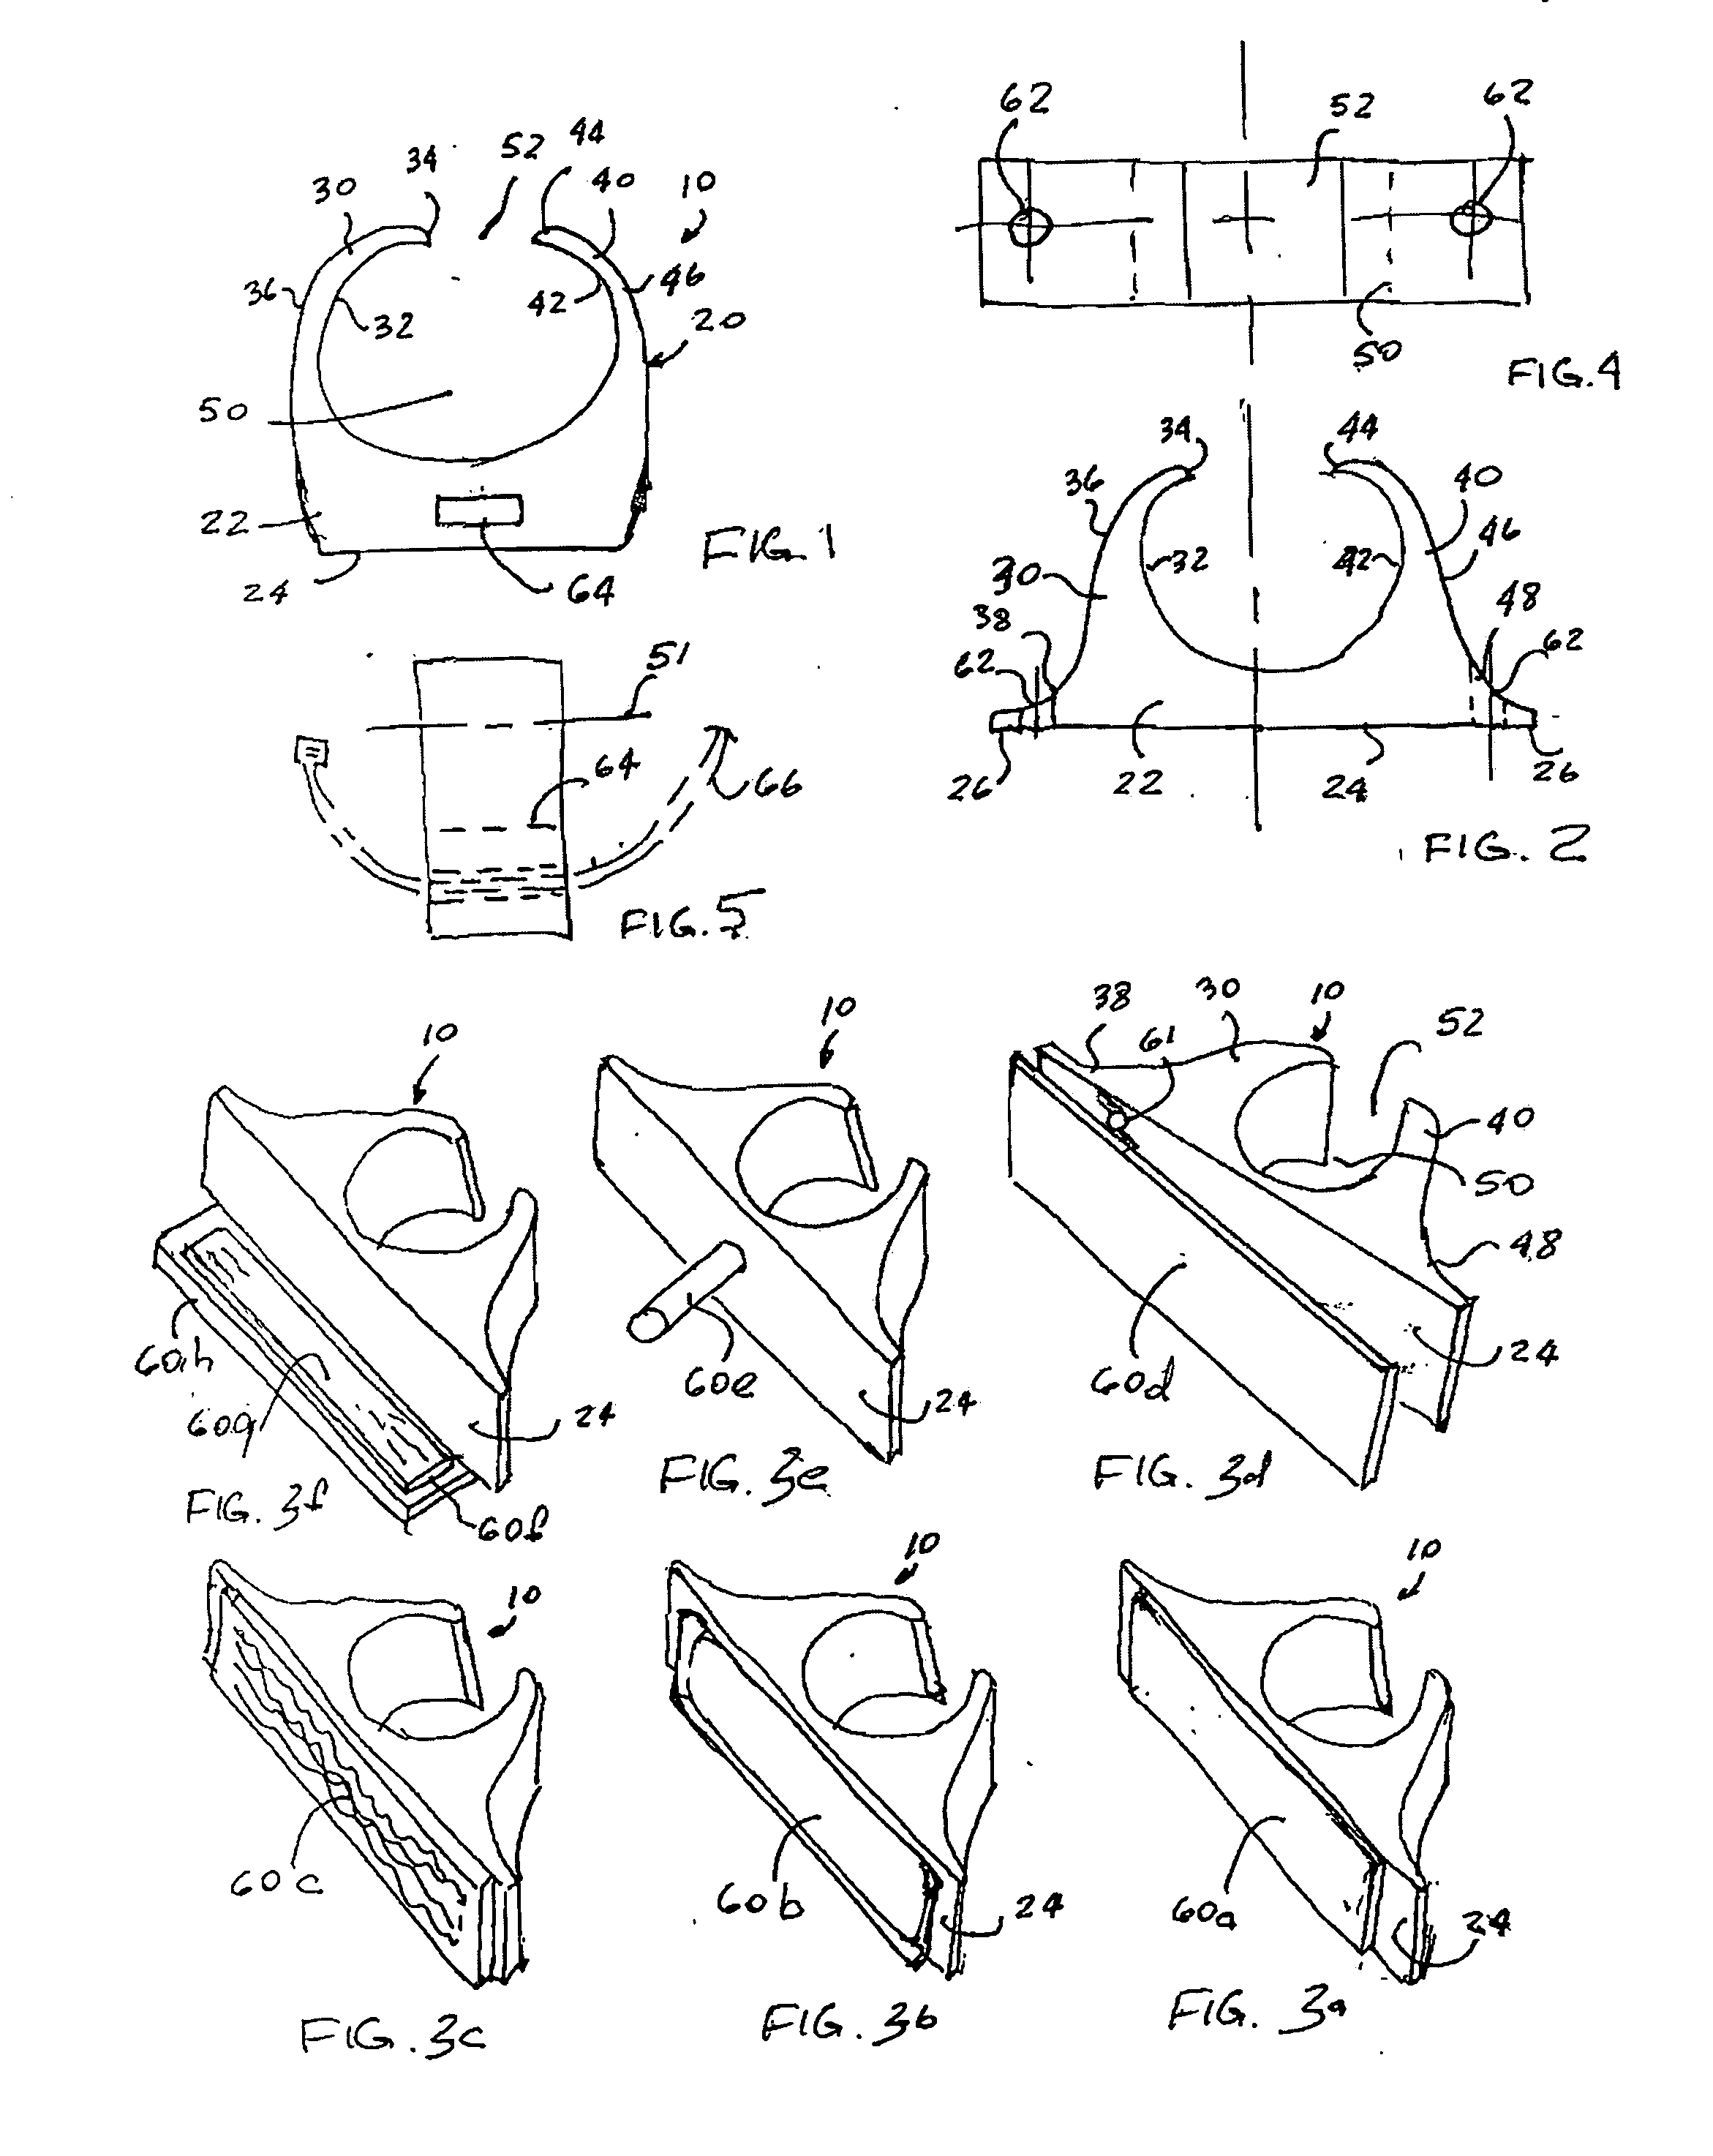 Device for retaining and supporting flexible elongated bodies